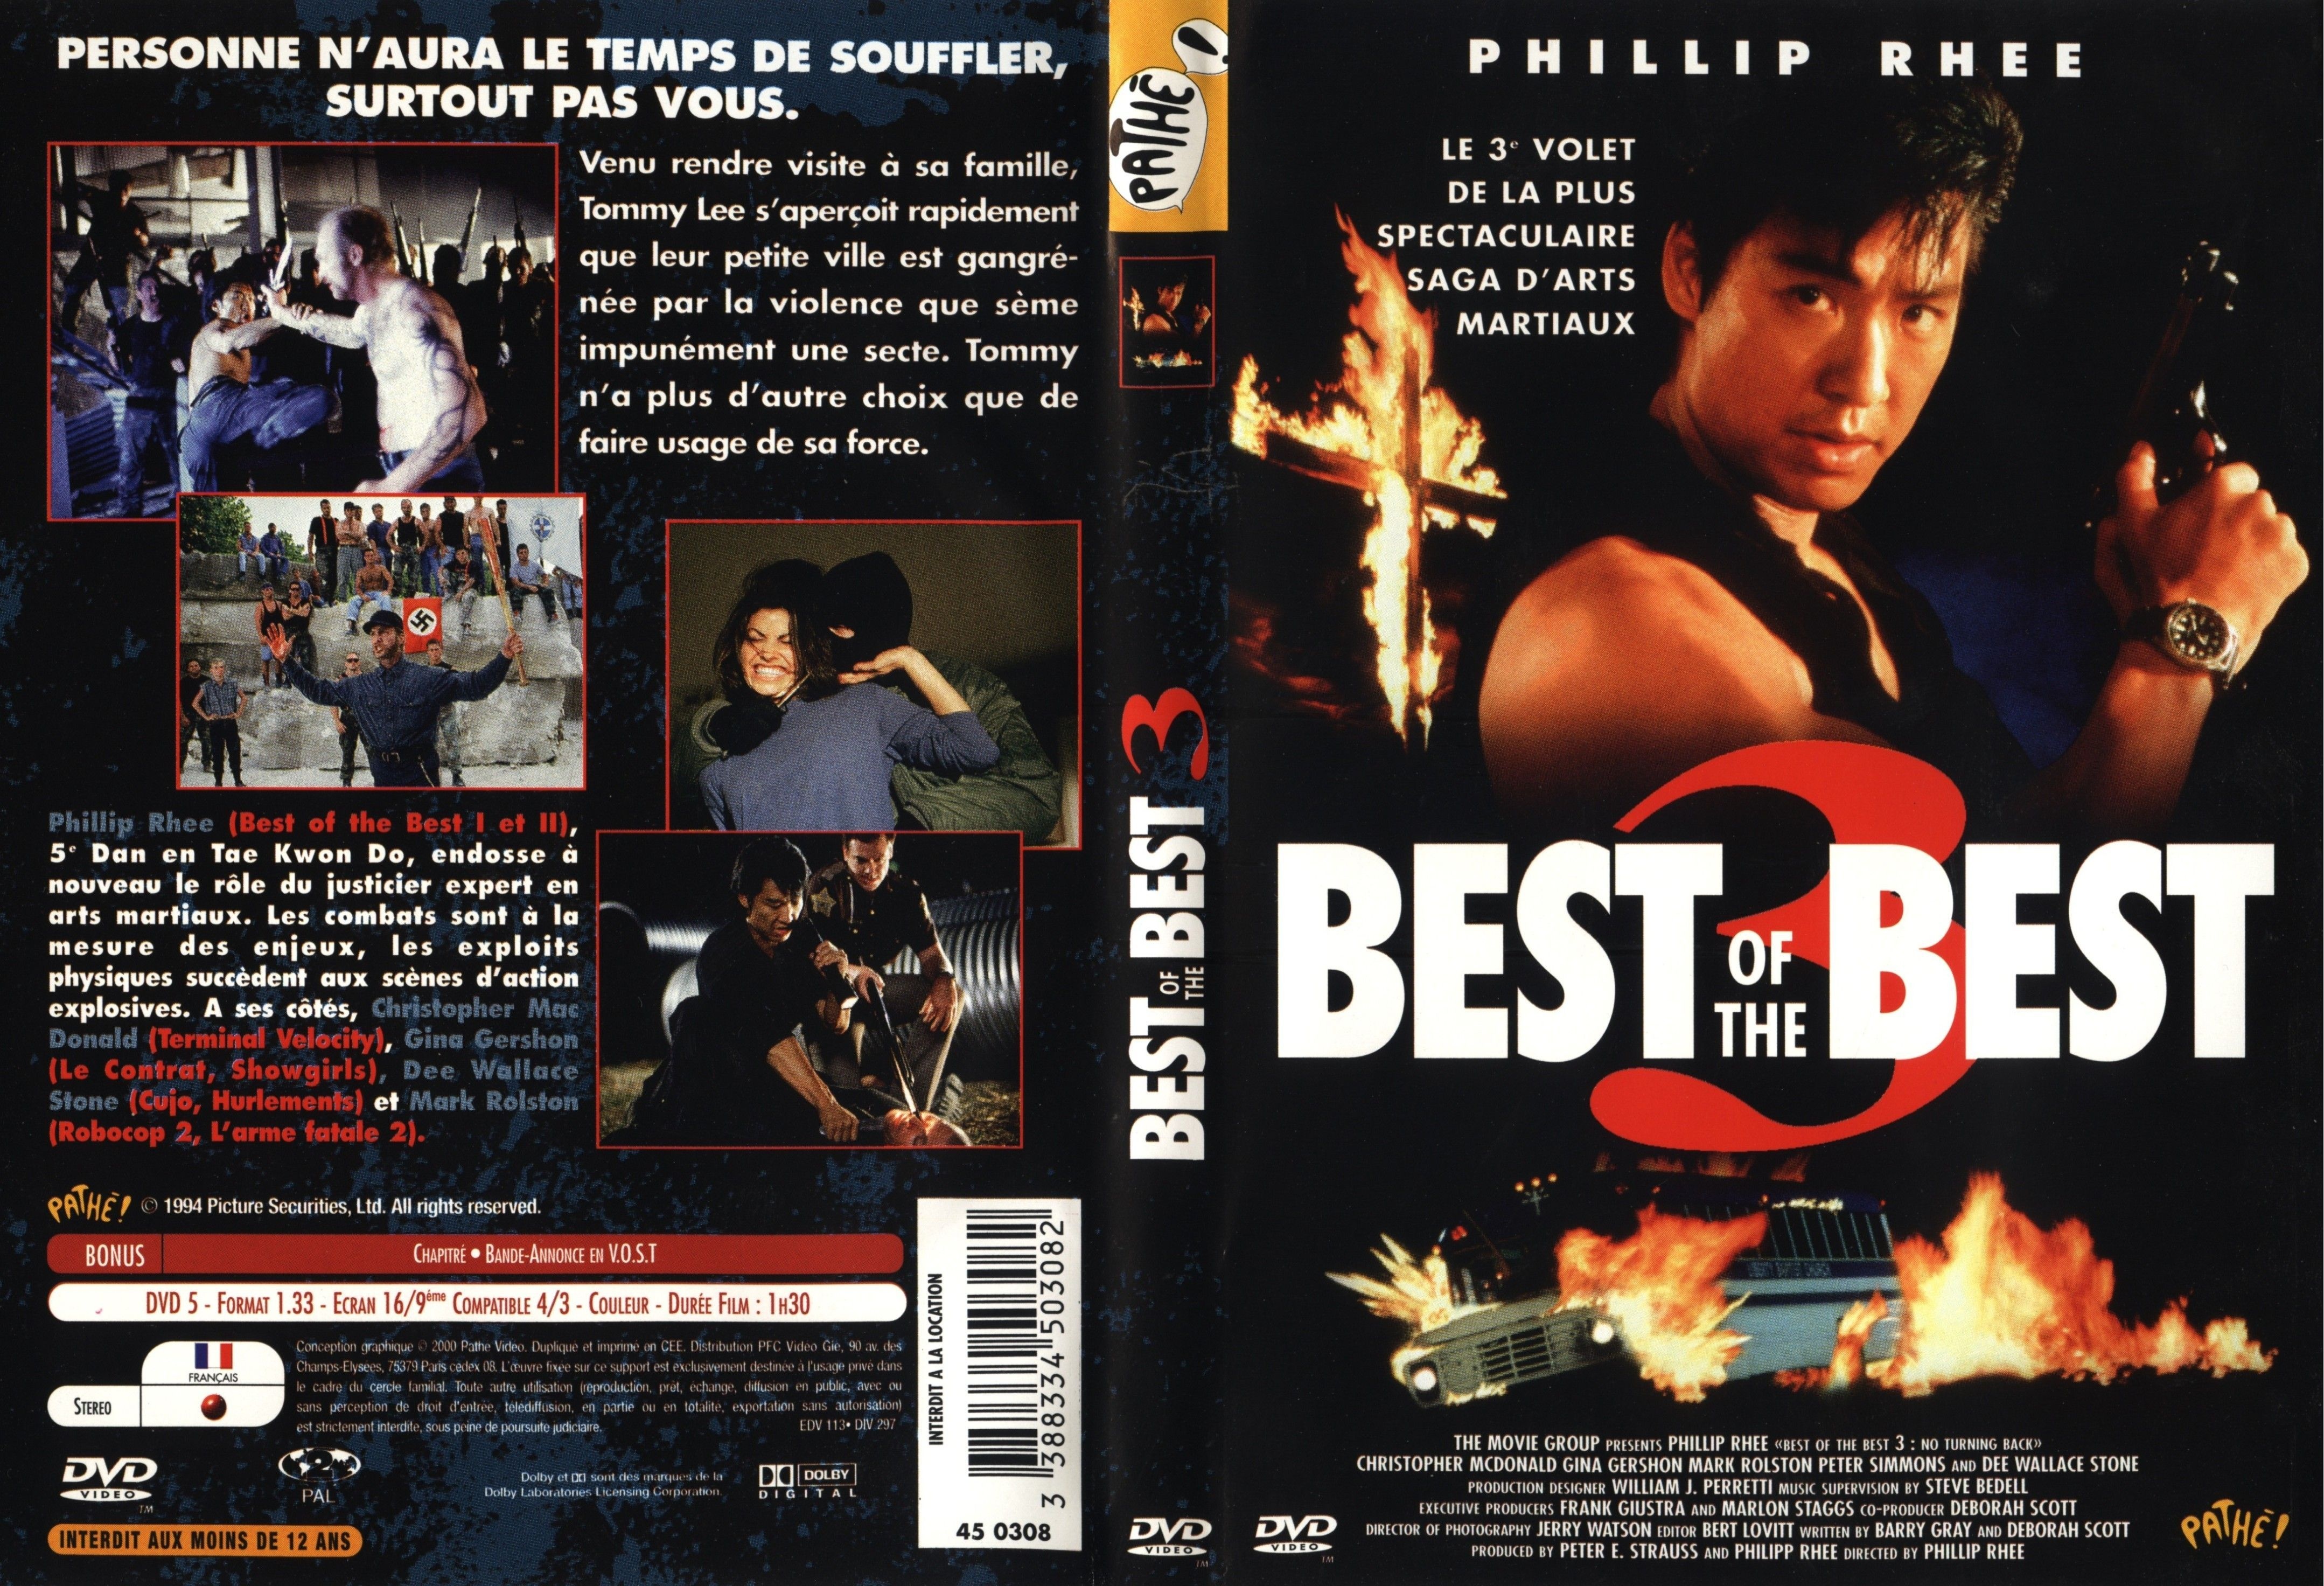 Jaquette DVD Best of the best 3